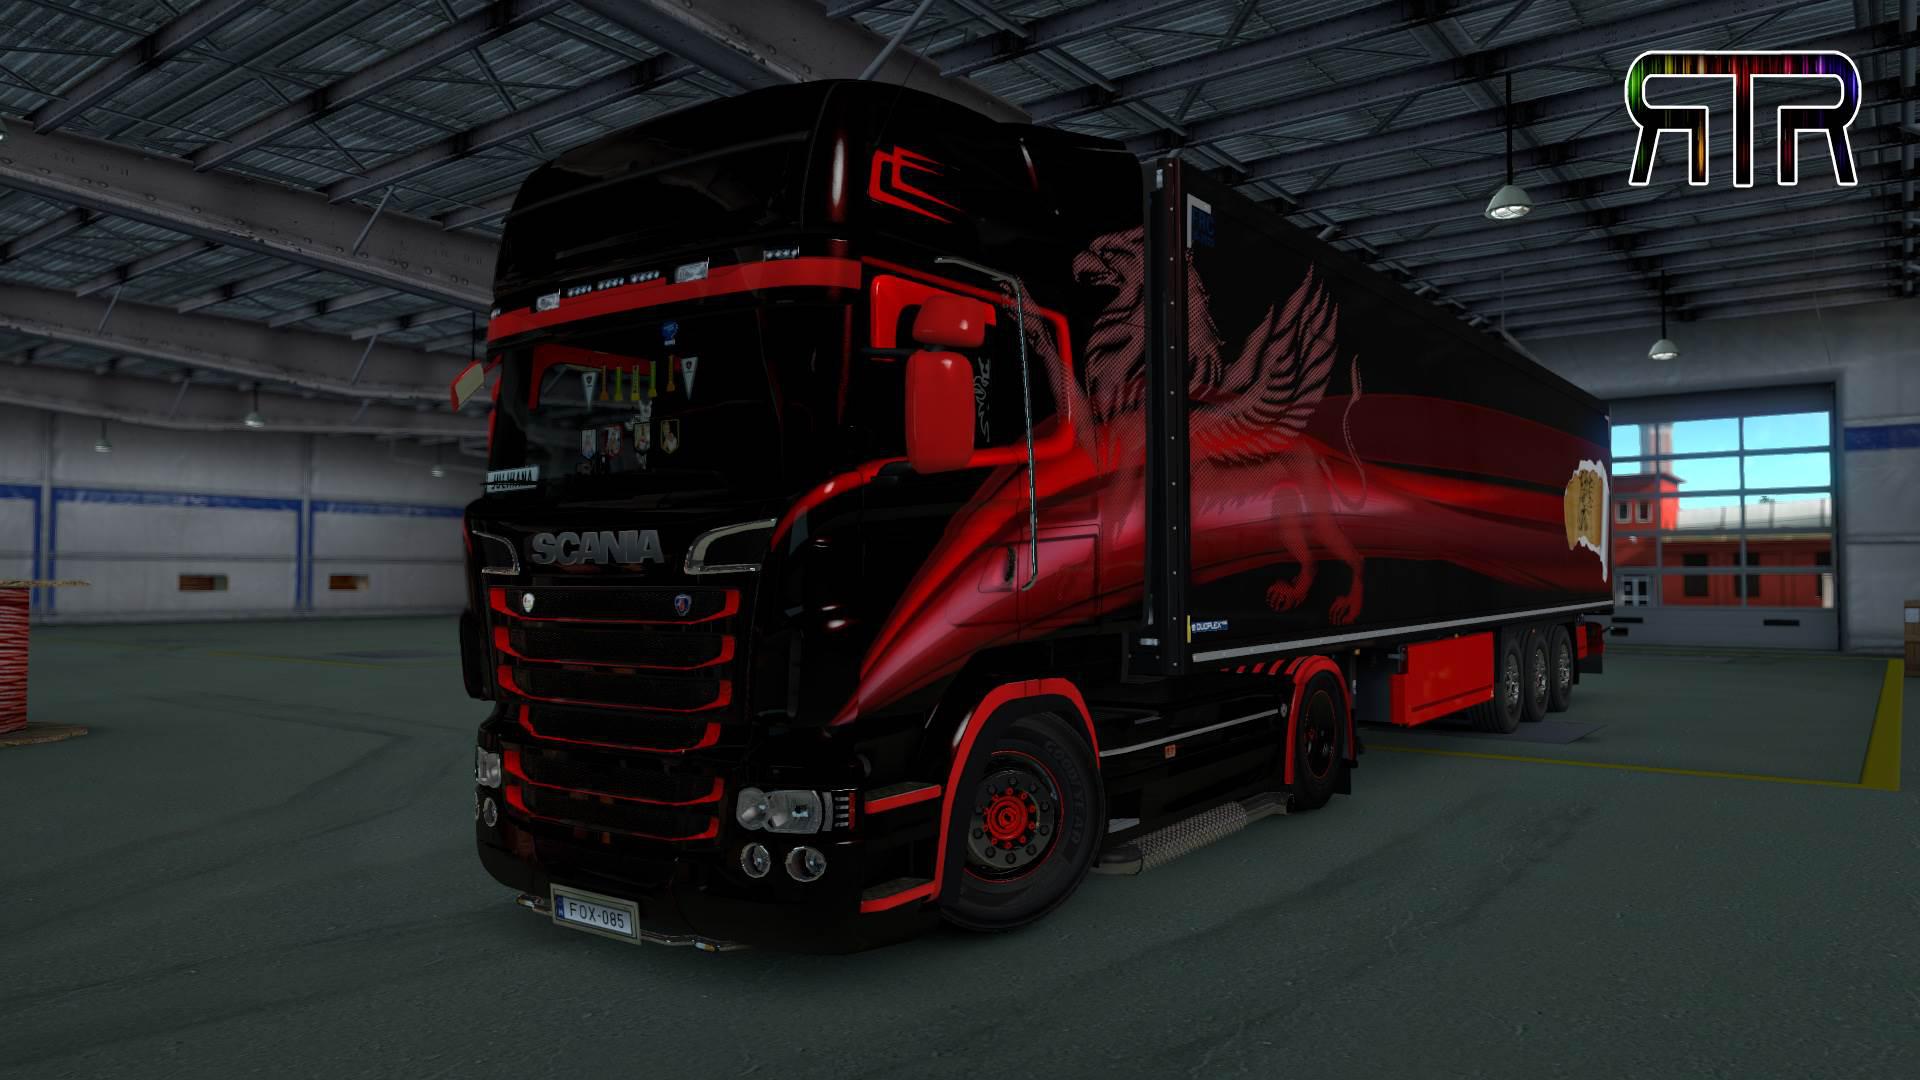 Griffin Skin For Scania Rjl Ets Euro Truck Simulator Mods American Truck Simulator Mods